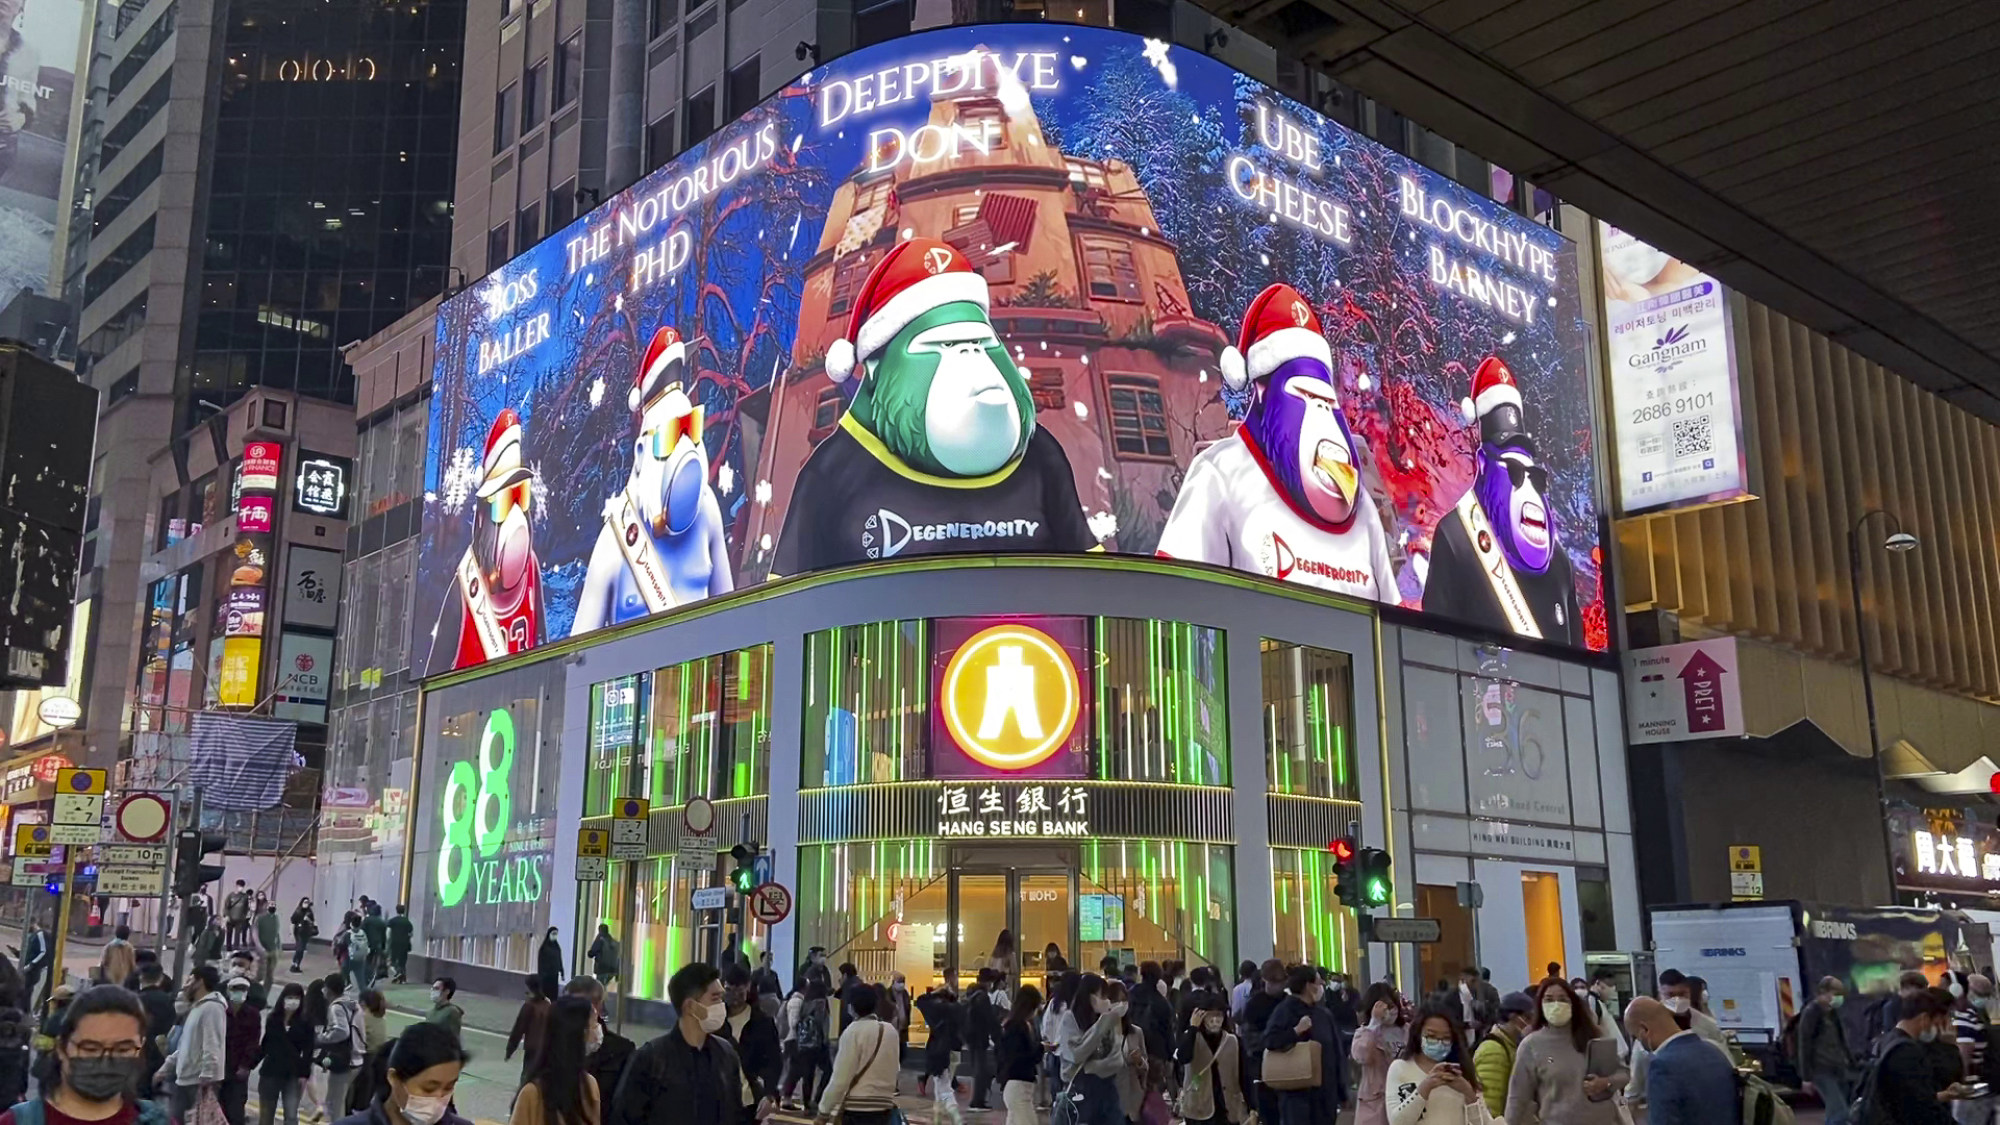 Hong Kong collectors of Degenerate Ape Academy, a popular non-fungible token project on the Solana blockchain, rented out advertising space in Central during the recent Christmas and New Year’s holiday season to promote their NFTs. Photo: Handout